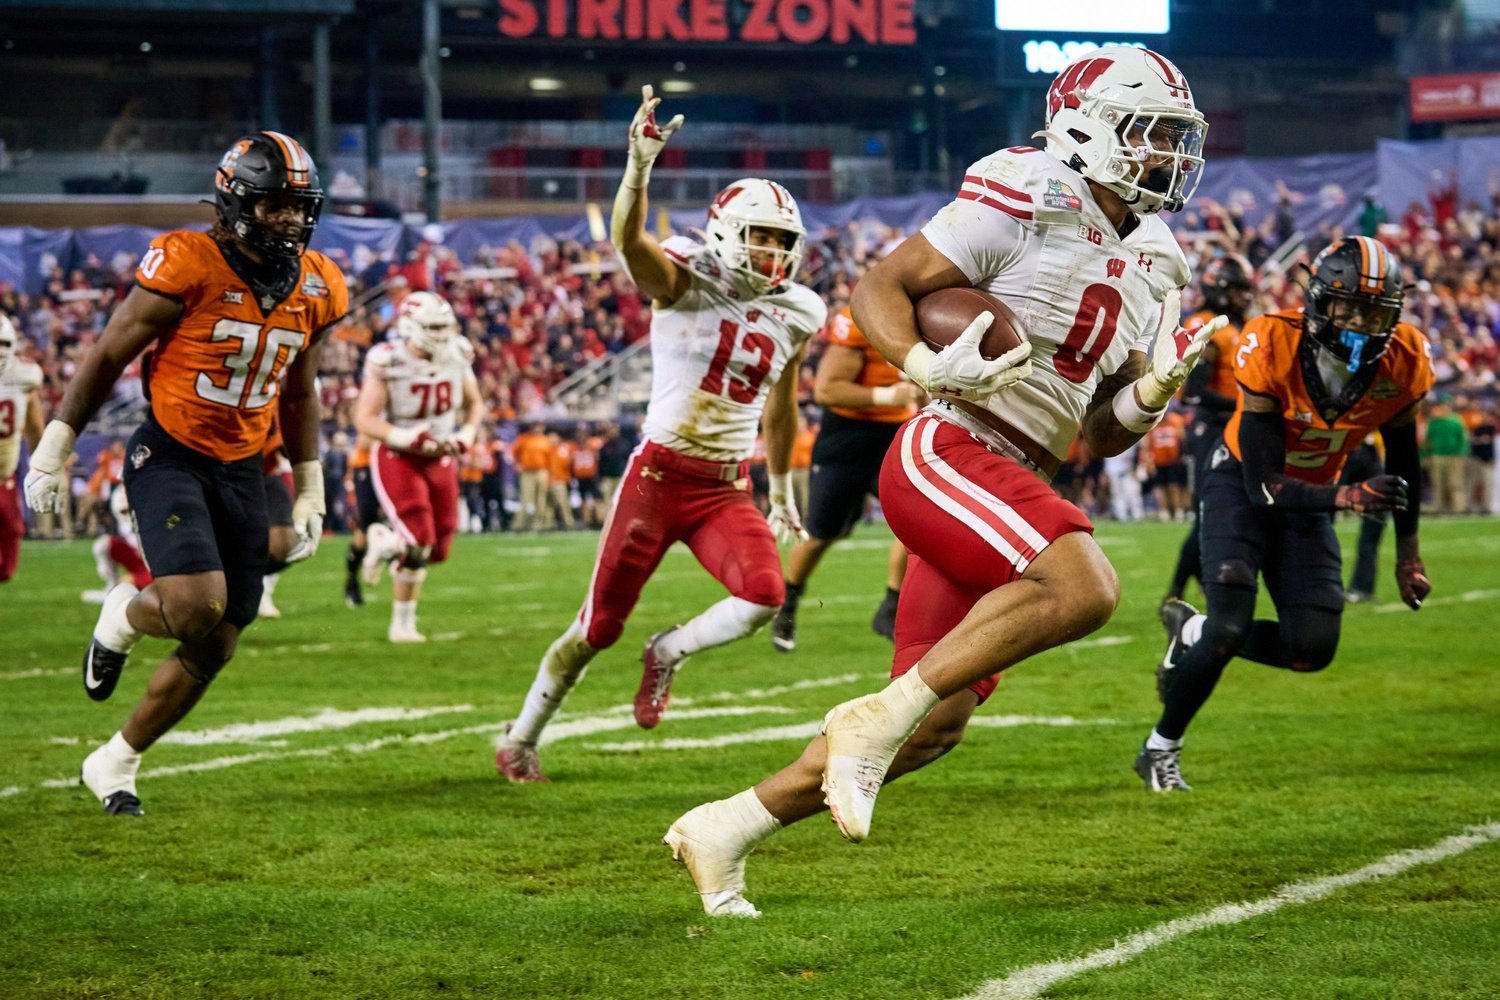 Wisconsin Football: Top 3 Badger prospects from 2021 NFL Draft